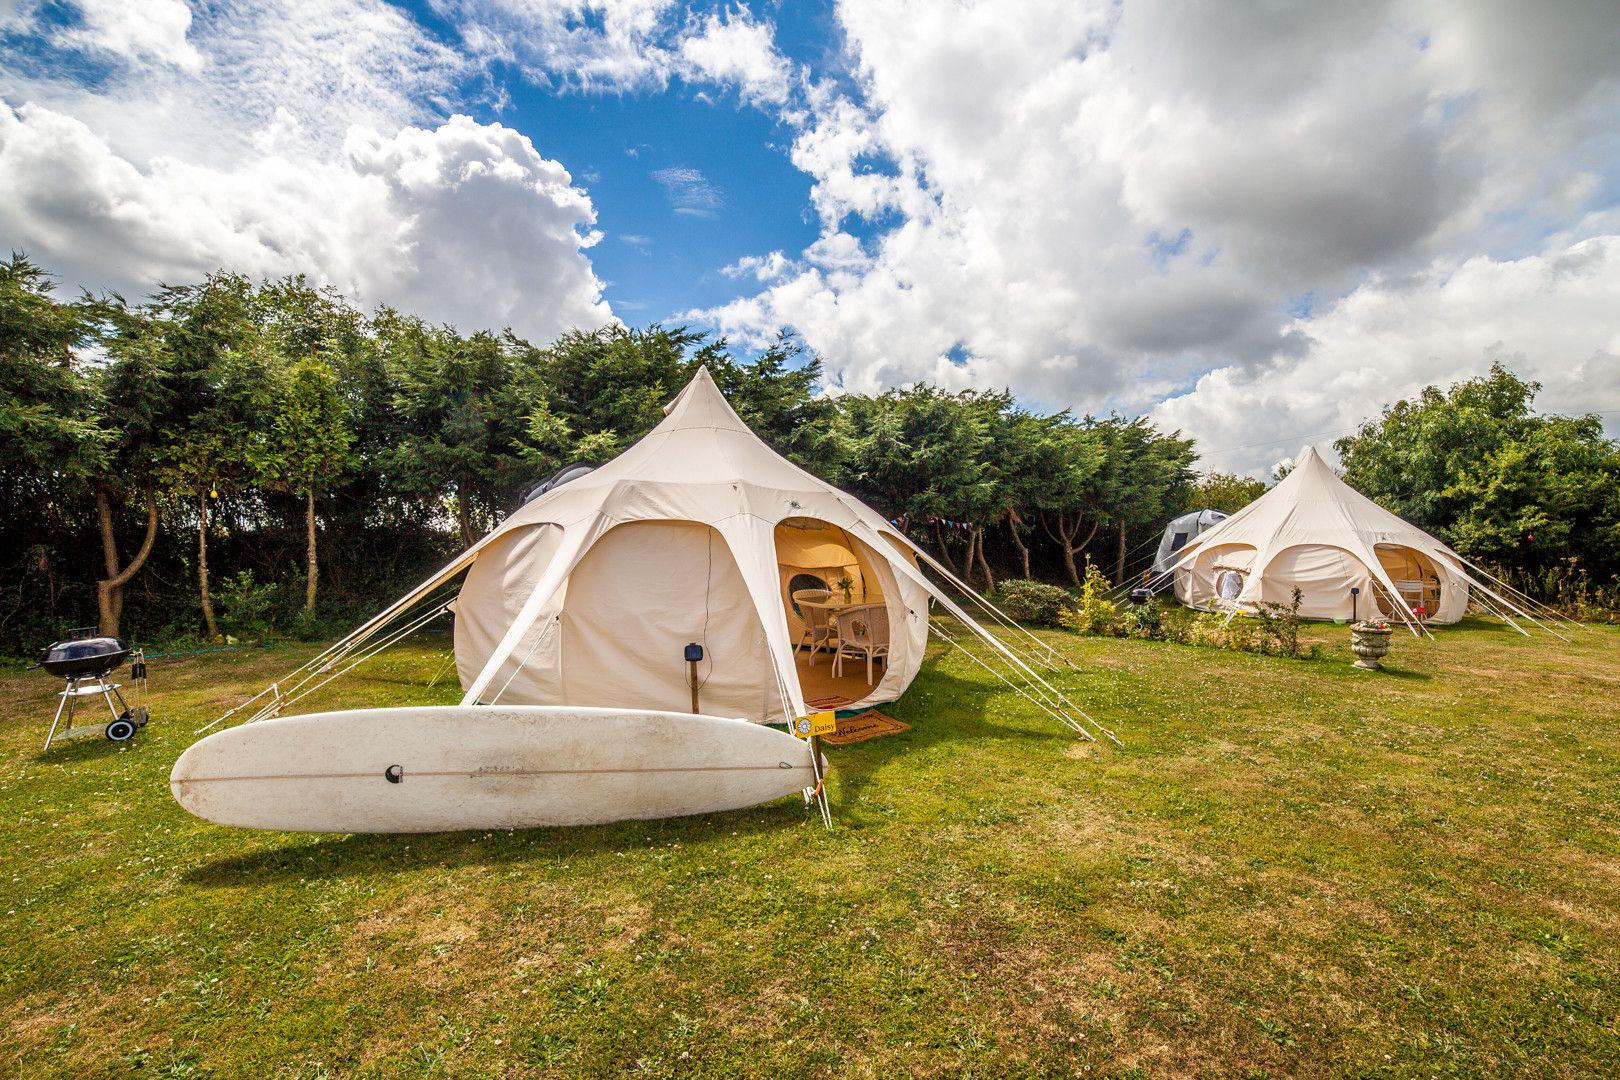 Glamping Accommodation Types - The most popular types of glamping accommodation